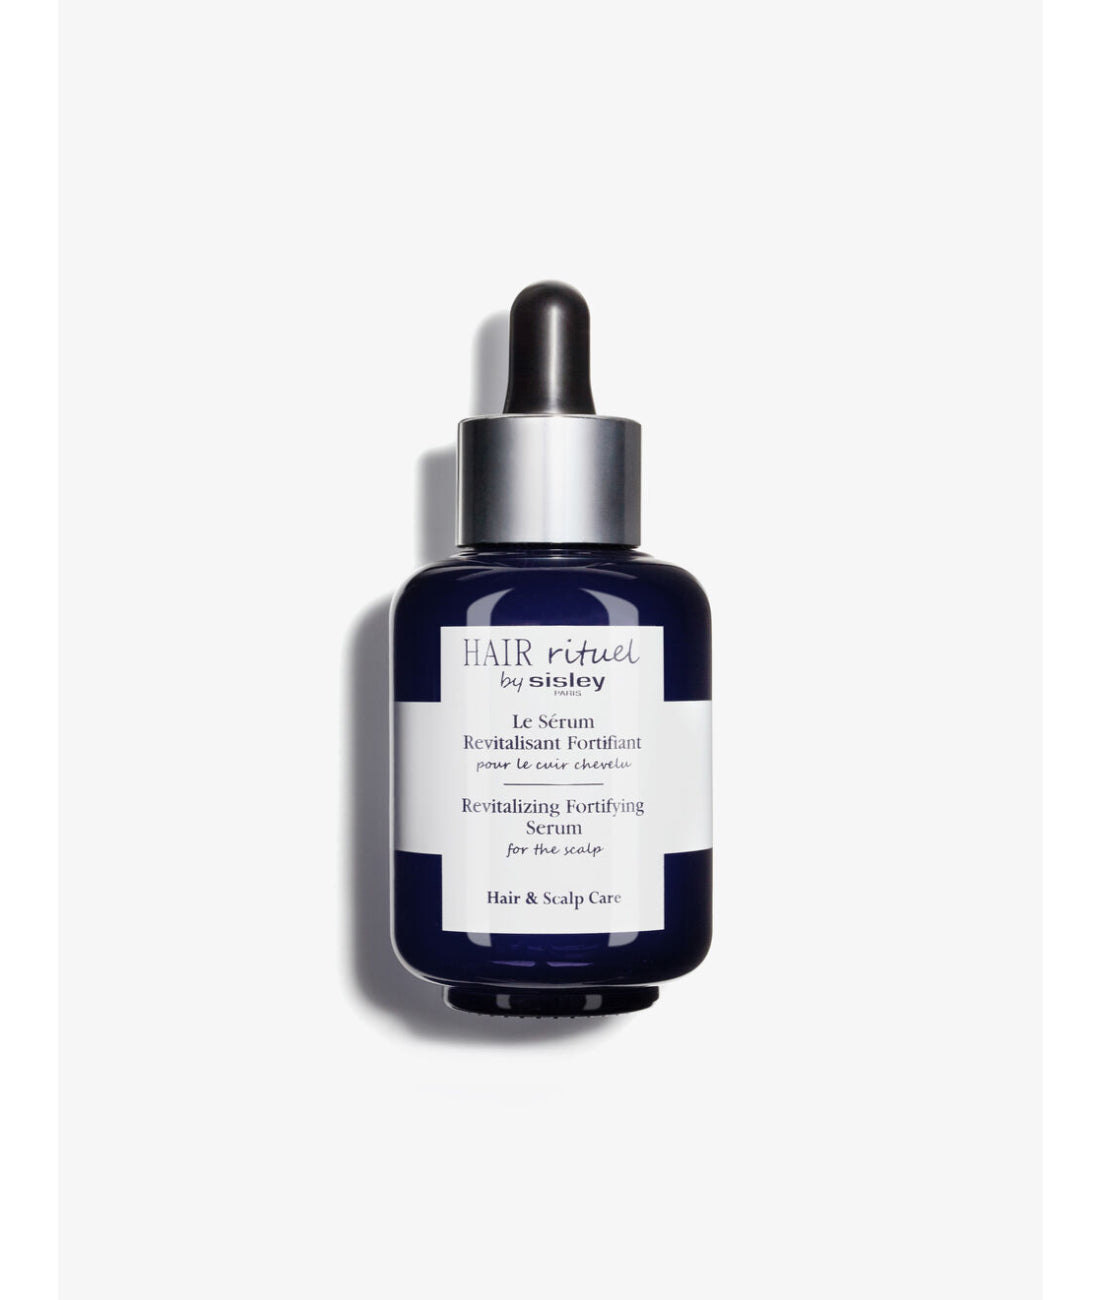 Revitalizing Fortifying Serum for the Scalp